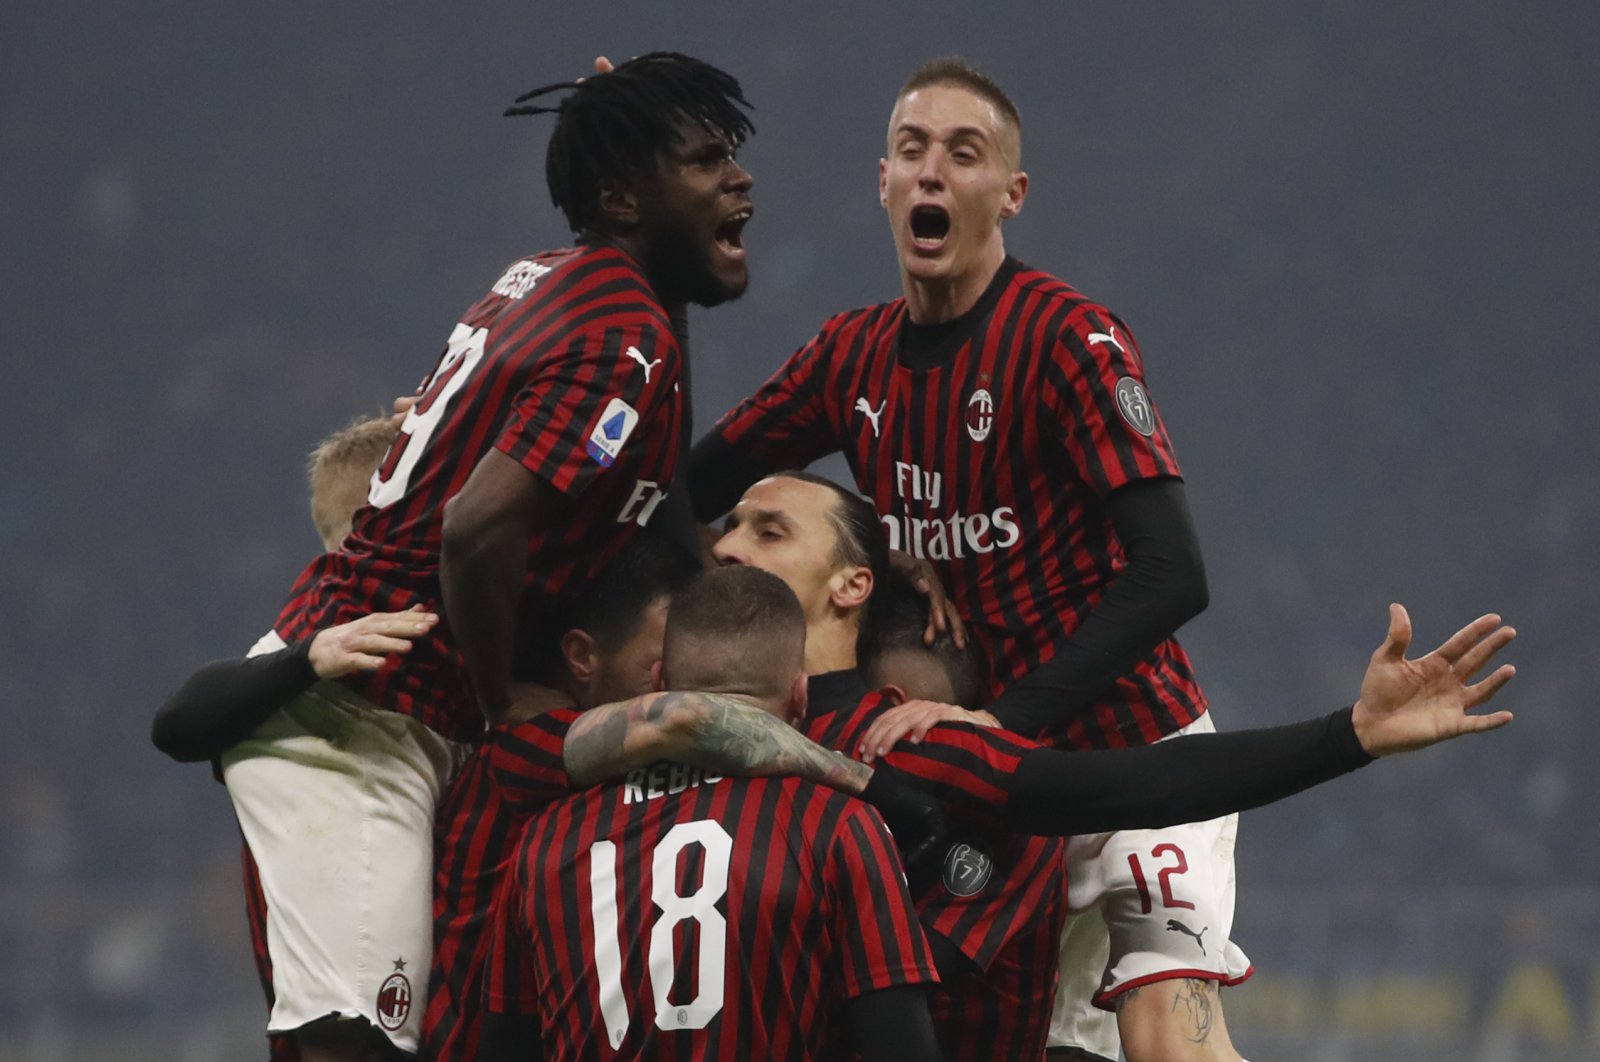 AC Milan's Zlatan Ibrahimovic (C) celebrates with his teammates after scoring his side's second goal during the Serie A match against Inter Milan, in Milan, Italy, Feb. 9, 2020. (AP Photo)